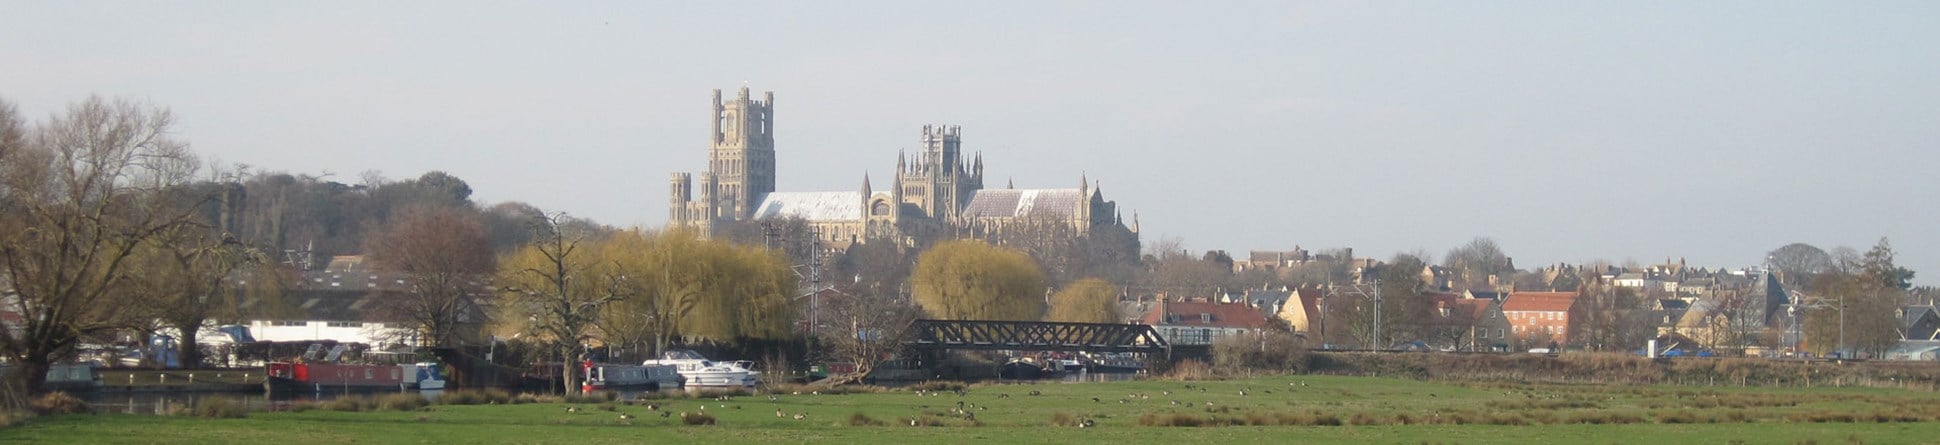 Ely Cathedral and surrounding town photographed across fields